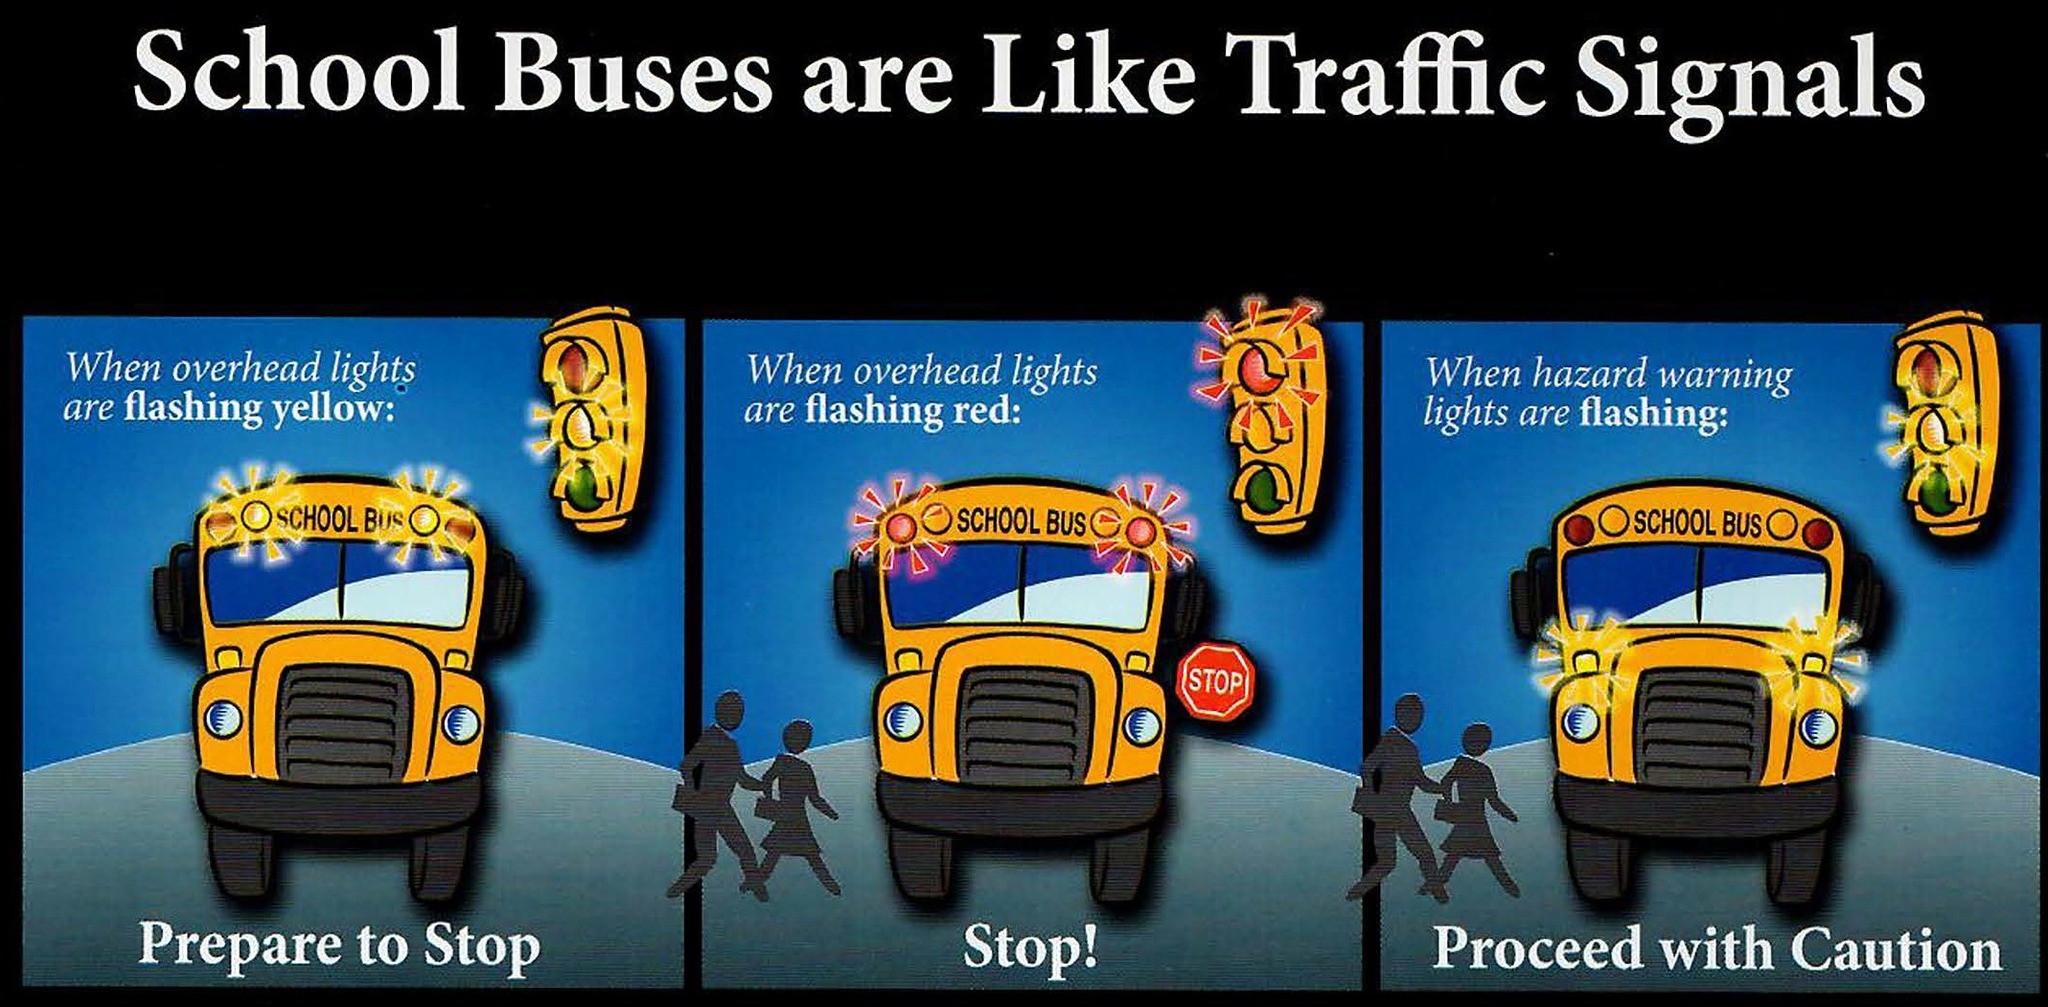 School Busses are Like Traffic Signals Infographic